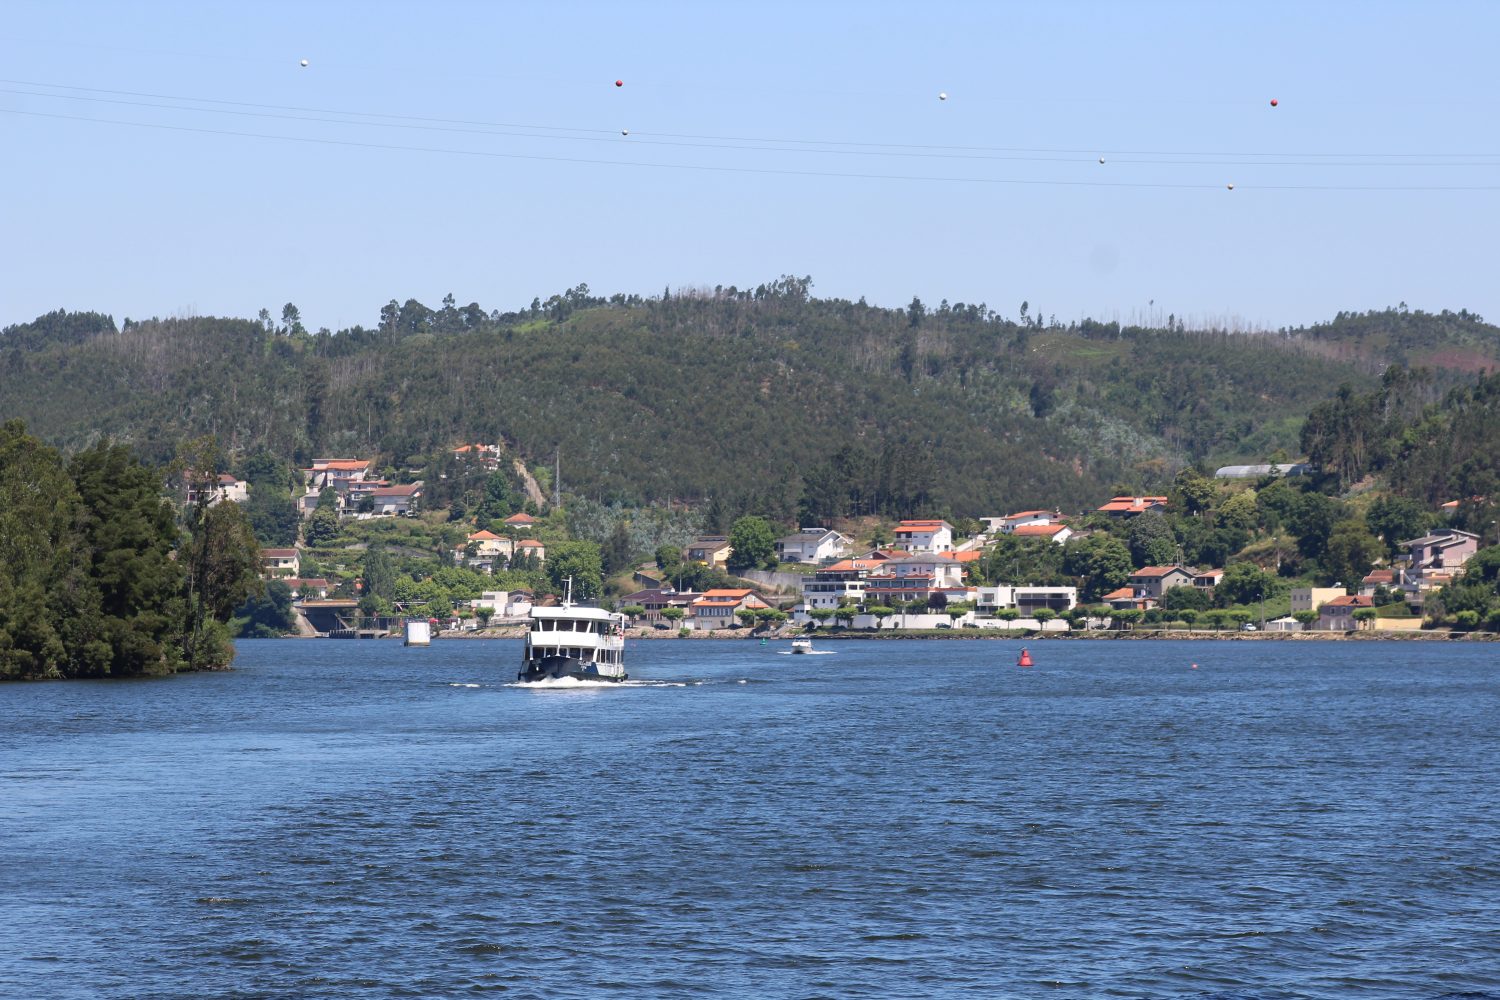 Boat in Douro river doing a cruise